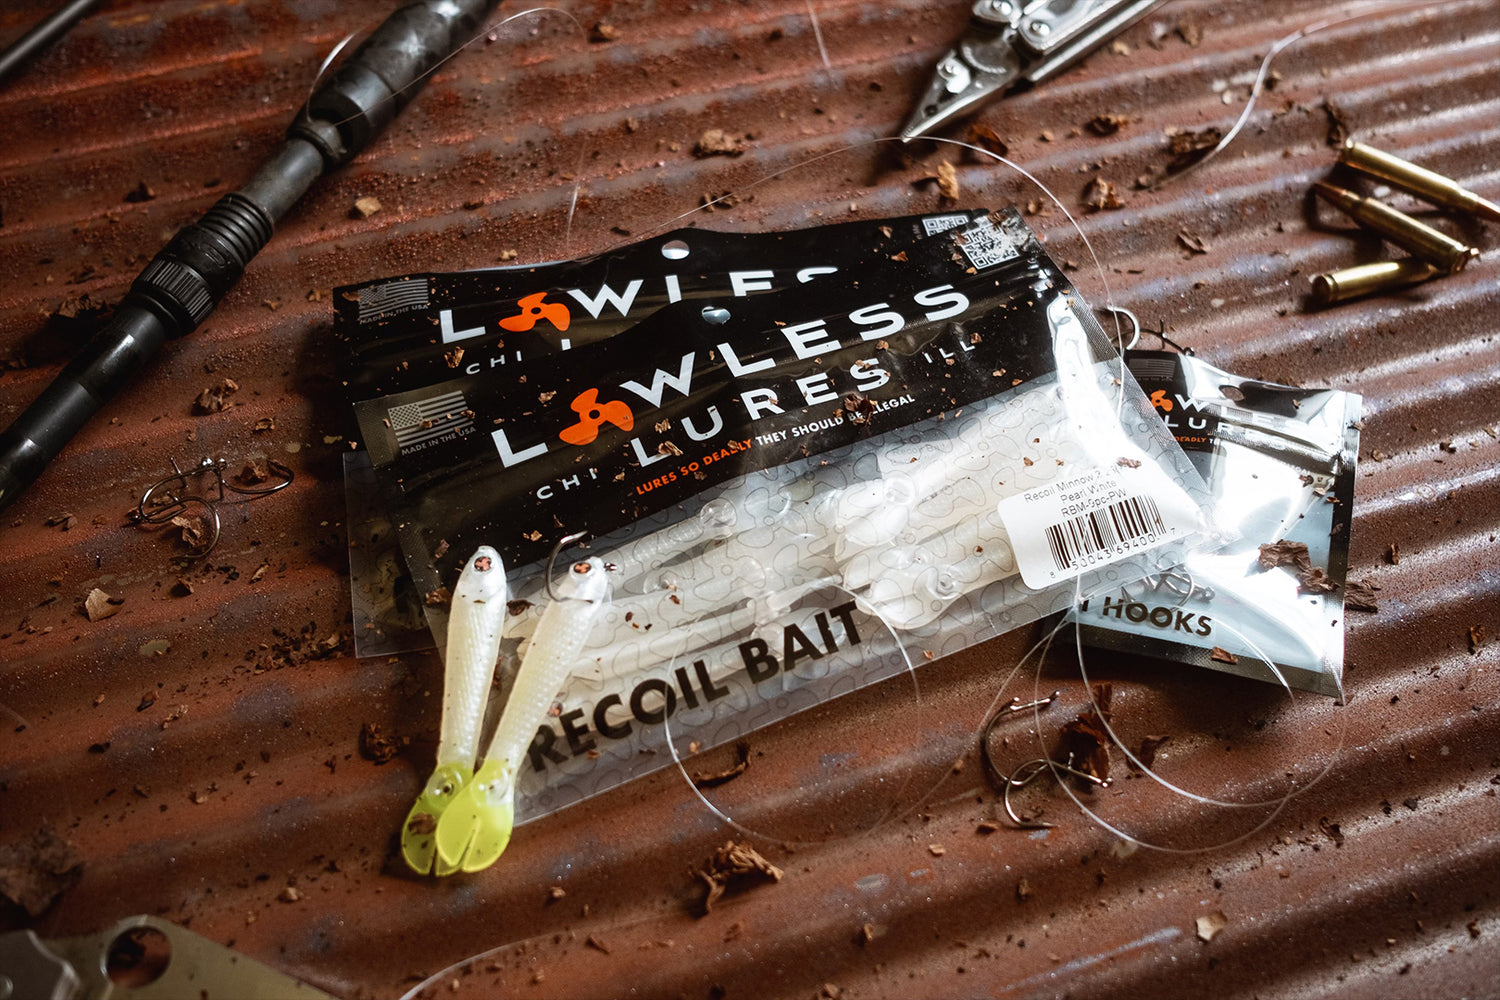 Recoil Baits – Lawless Lures New Zealand